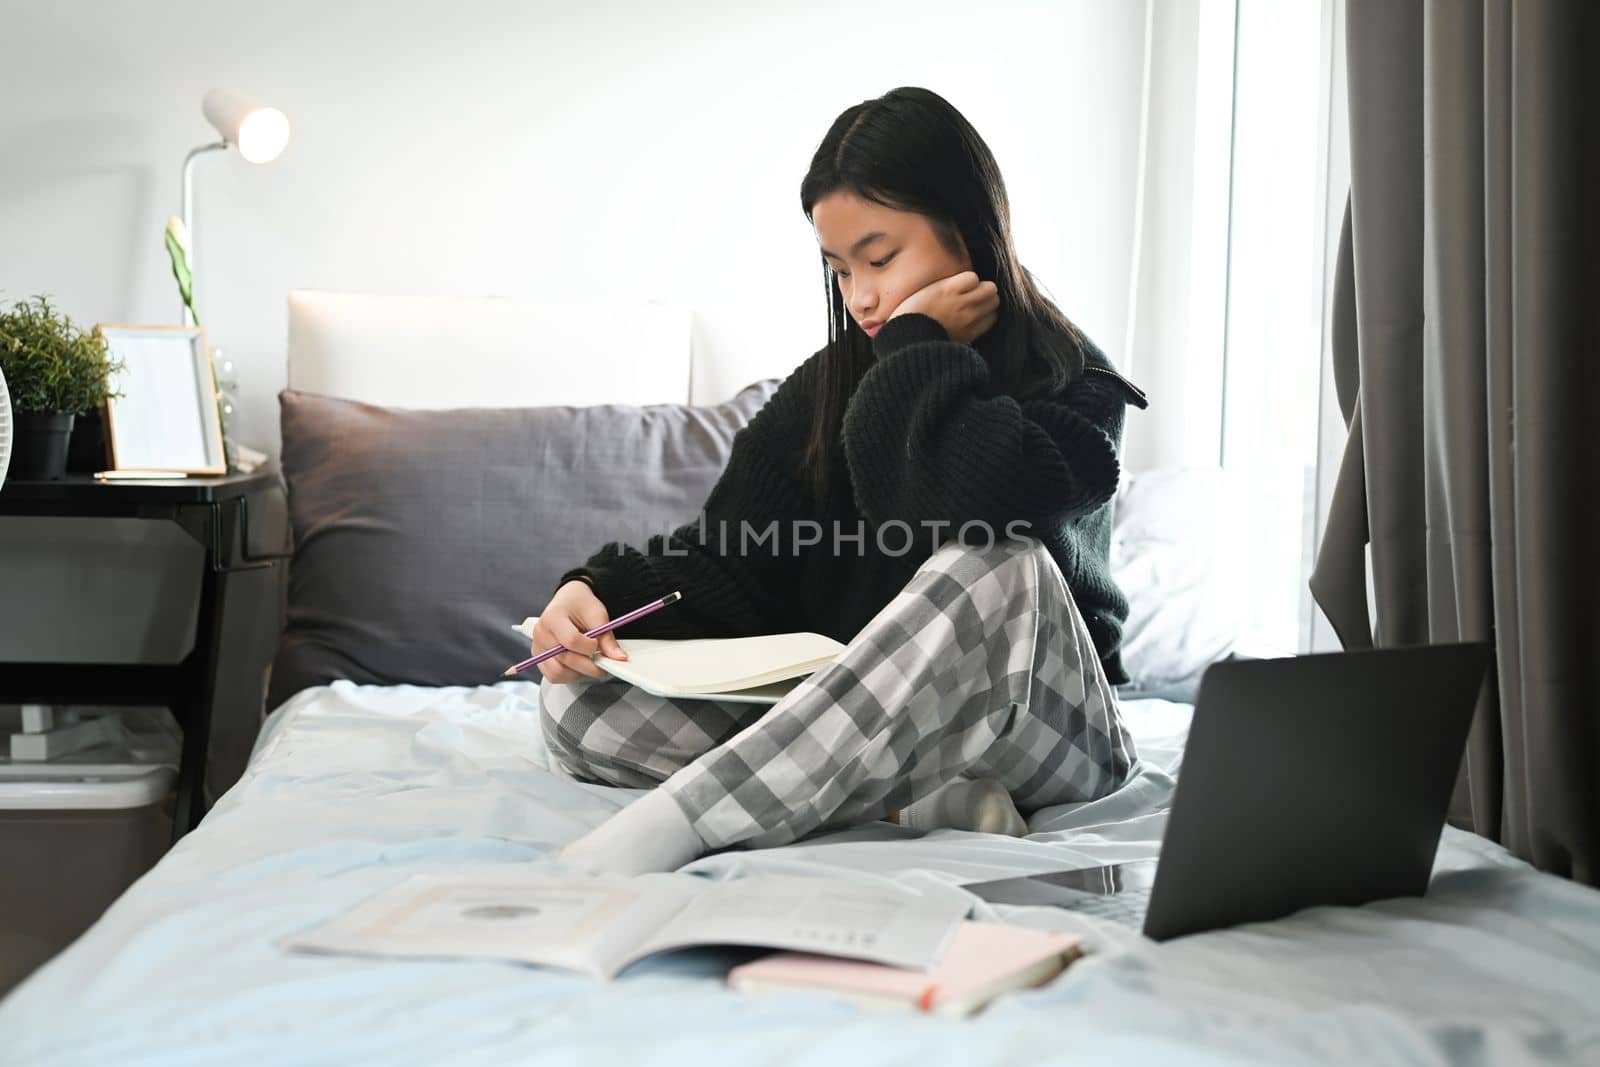 Teenage asian girl sitting on bed and doing homework. Distance education, studying online concept.